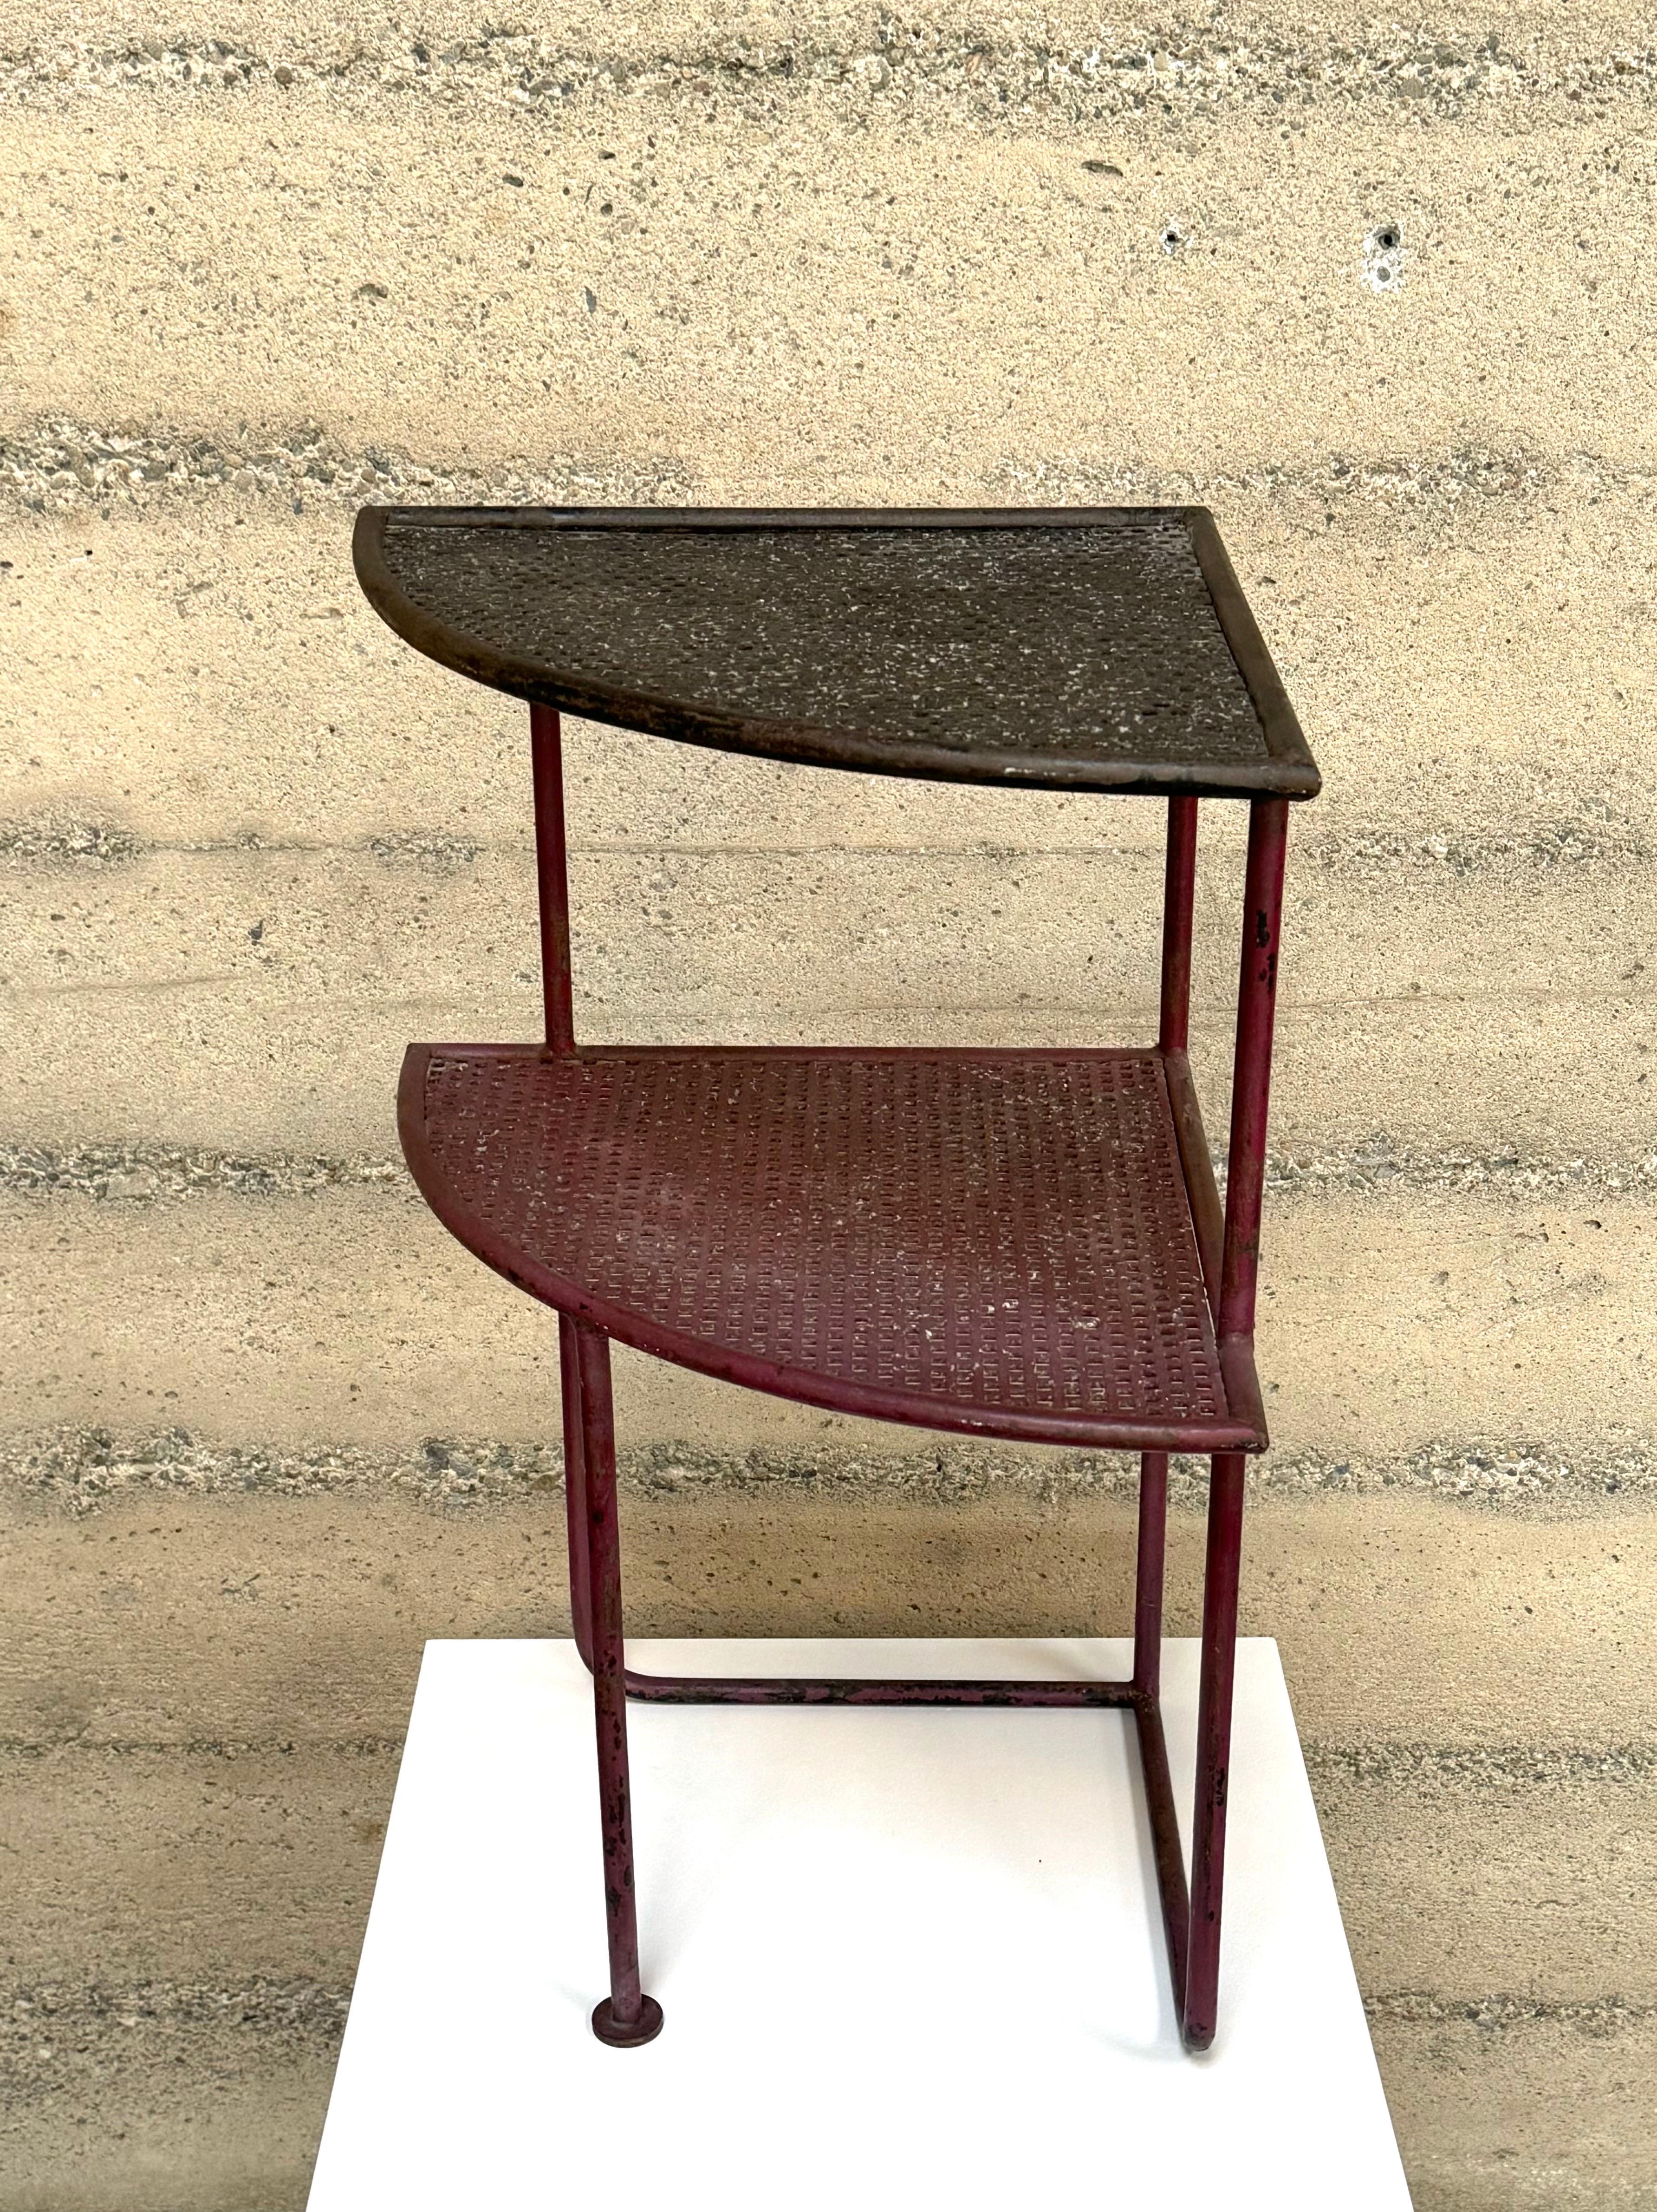 Triangular perforated metal side table in the style of Mathieu Mategot, all original condition with a soft red and black finish, there is a distinctive patina to the finish giving it a rich character. The table has two shelves of equal size with a